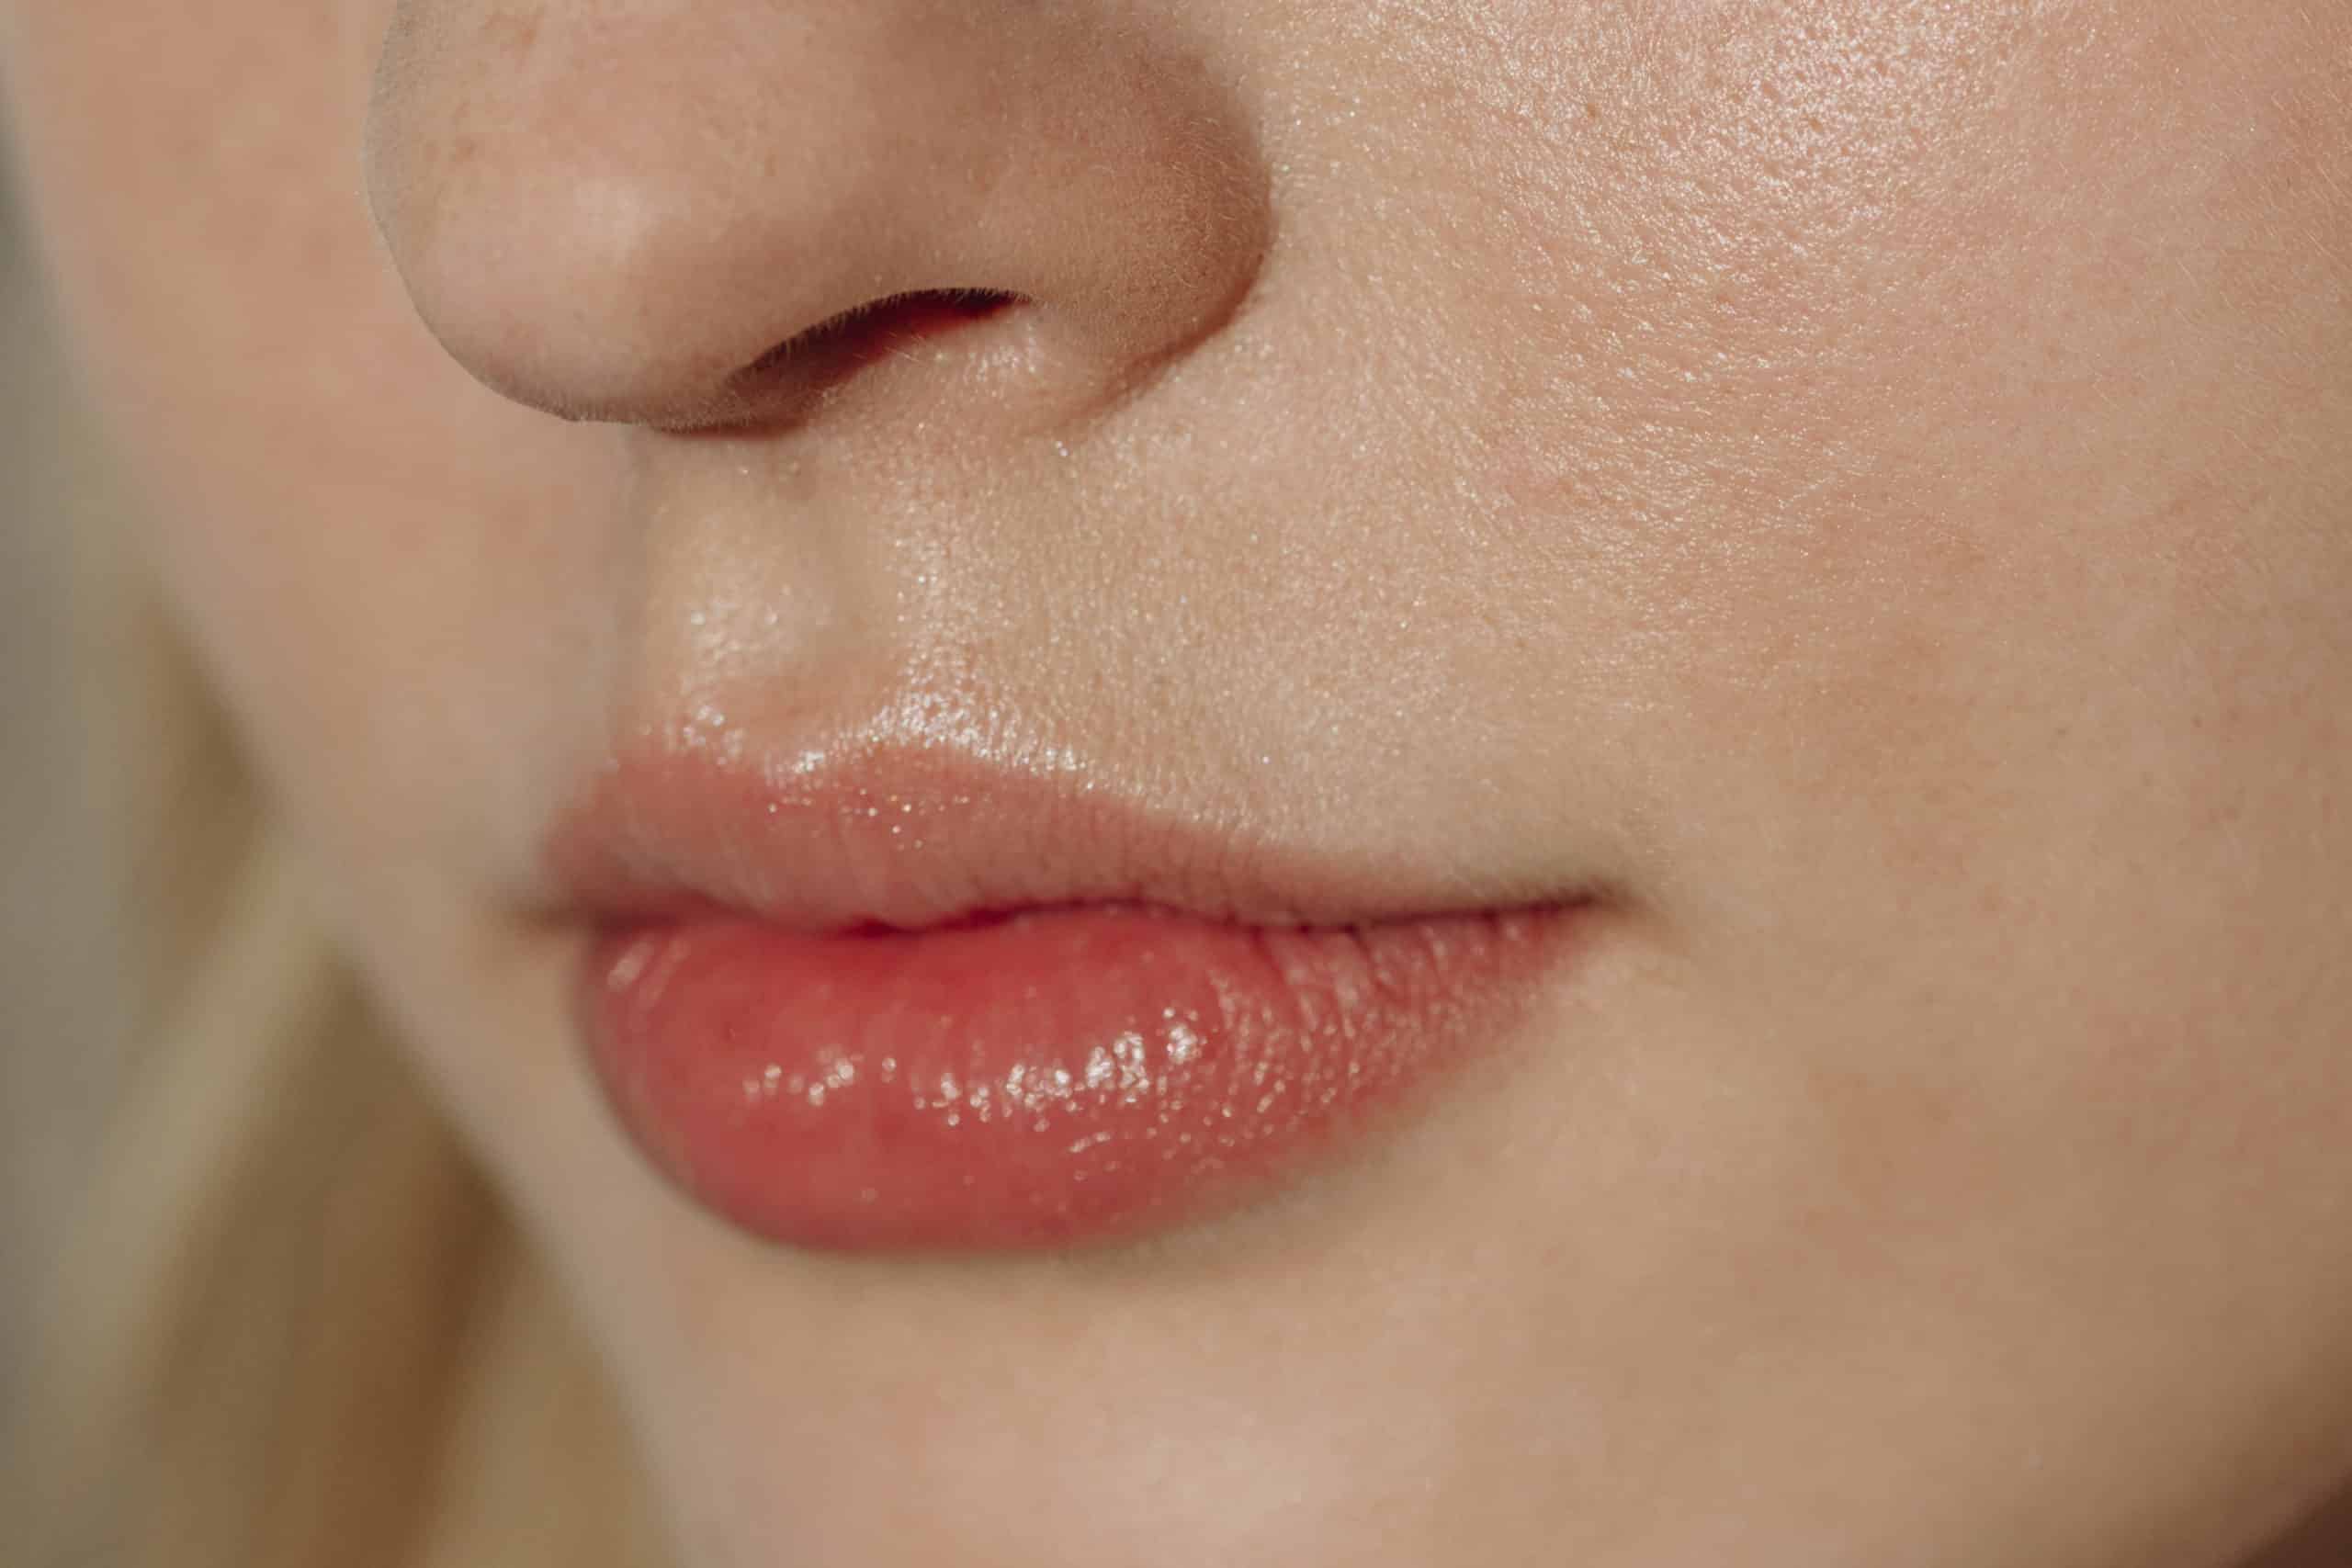 There are more options for achieving plump lips than you may think. Here, the experts break down plumping products, fillers, implants, and more.